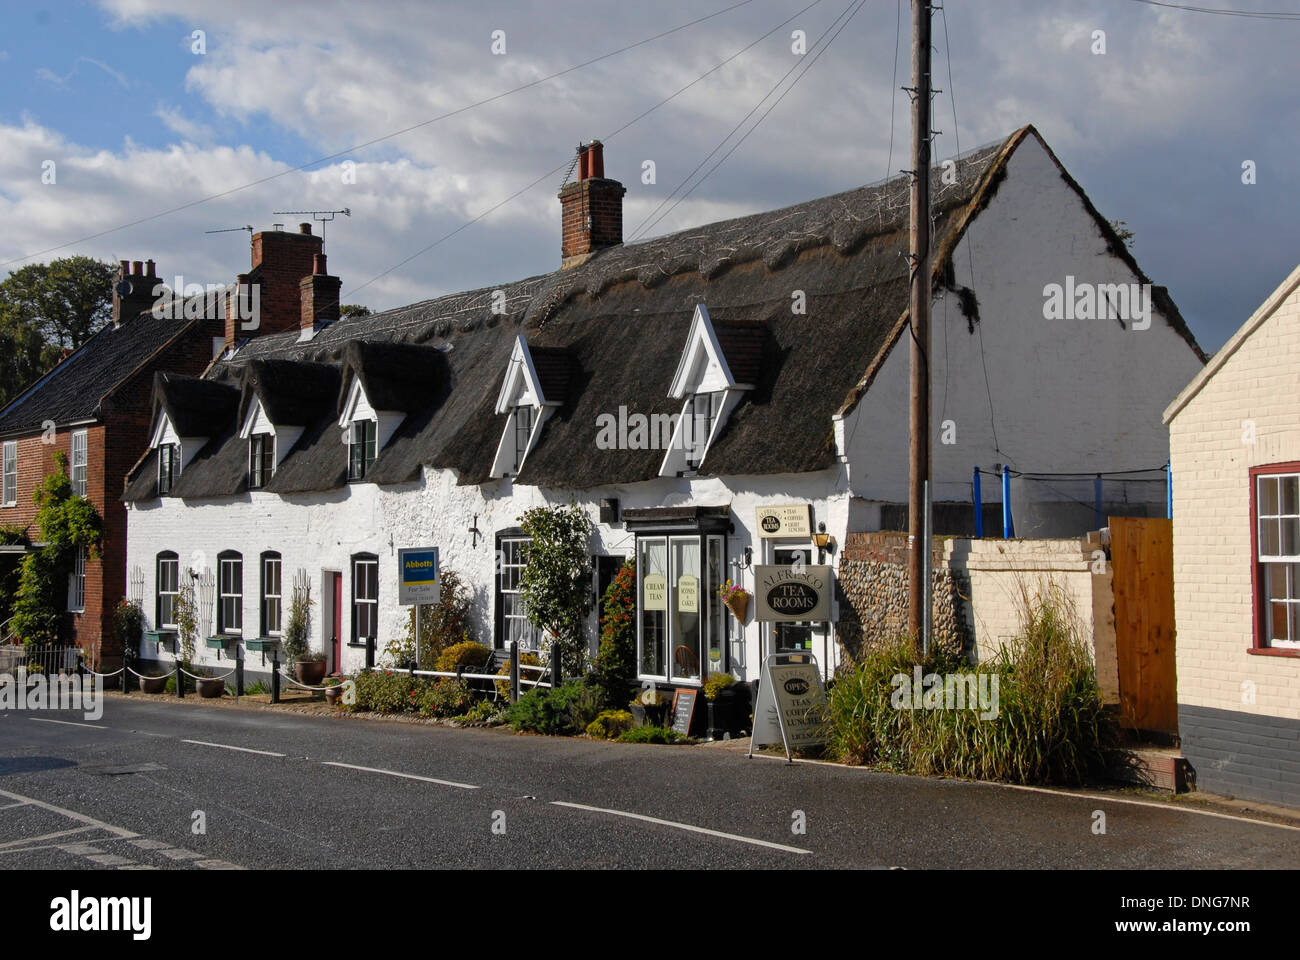 Row of white thatched cottages, Ludham, Norfolk, England Stock Photo